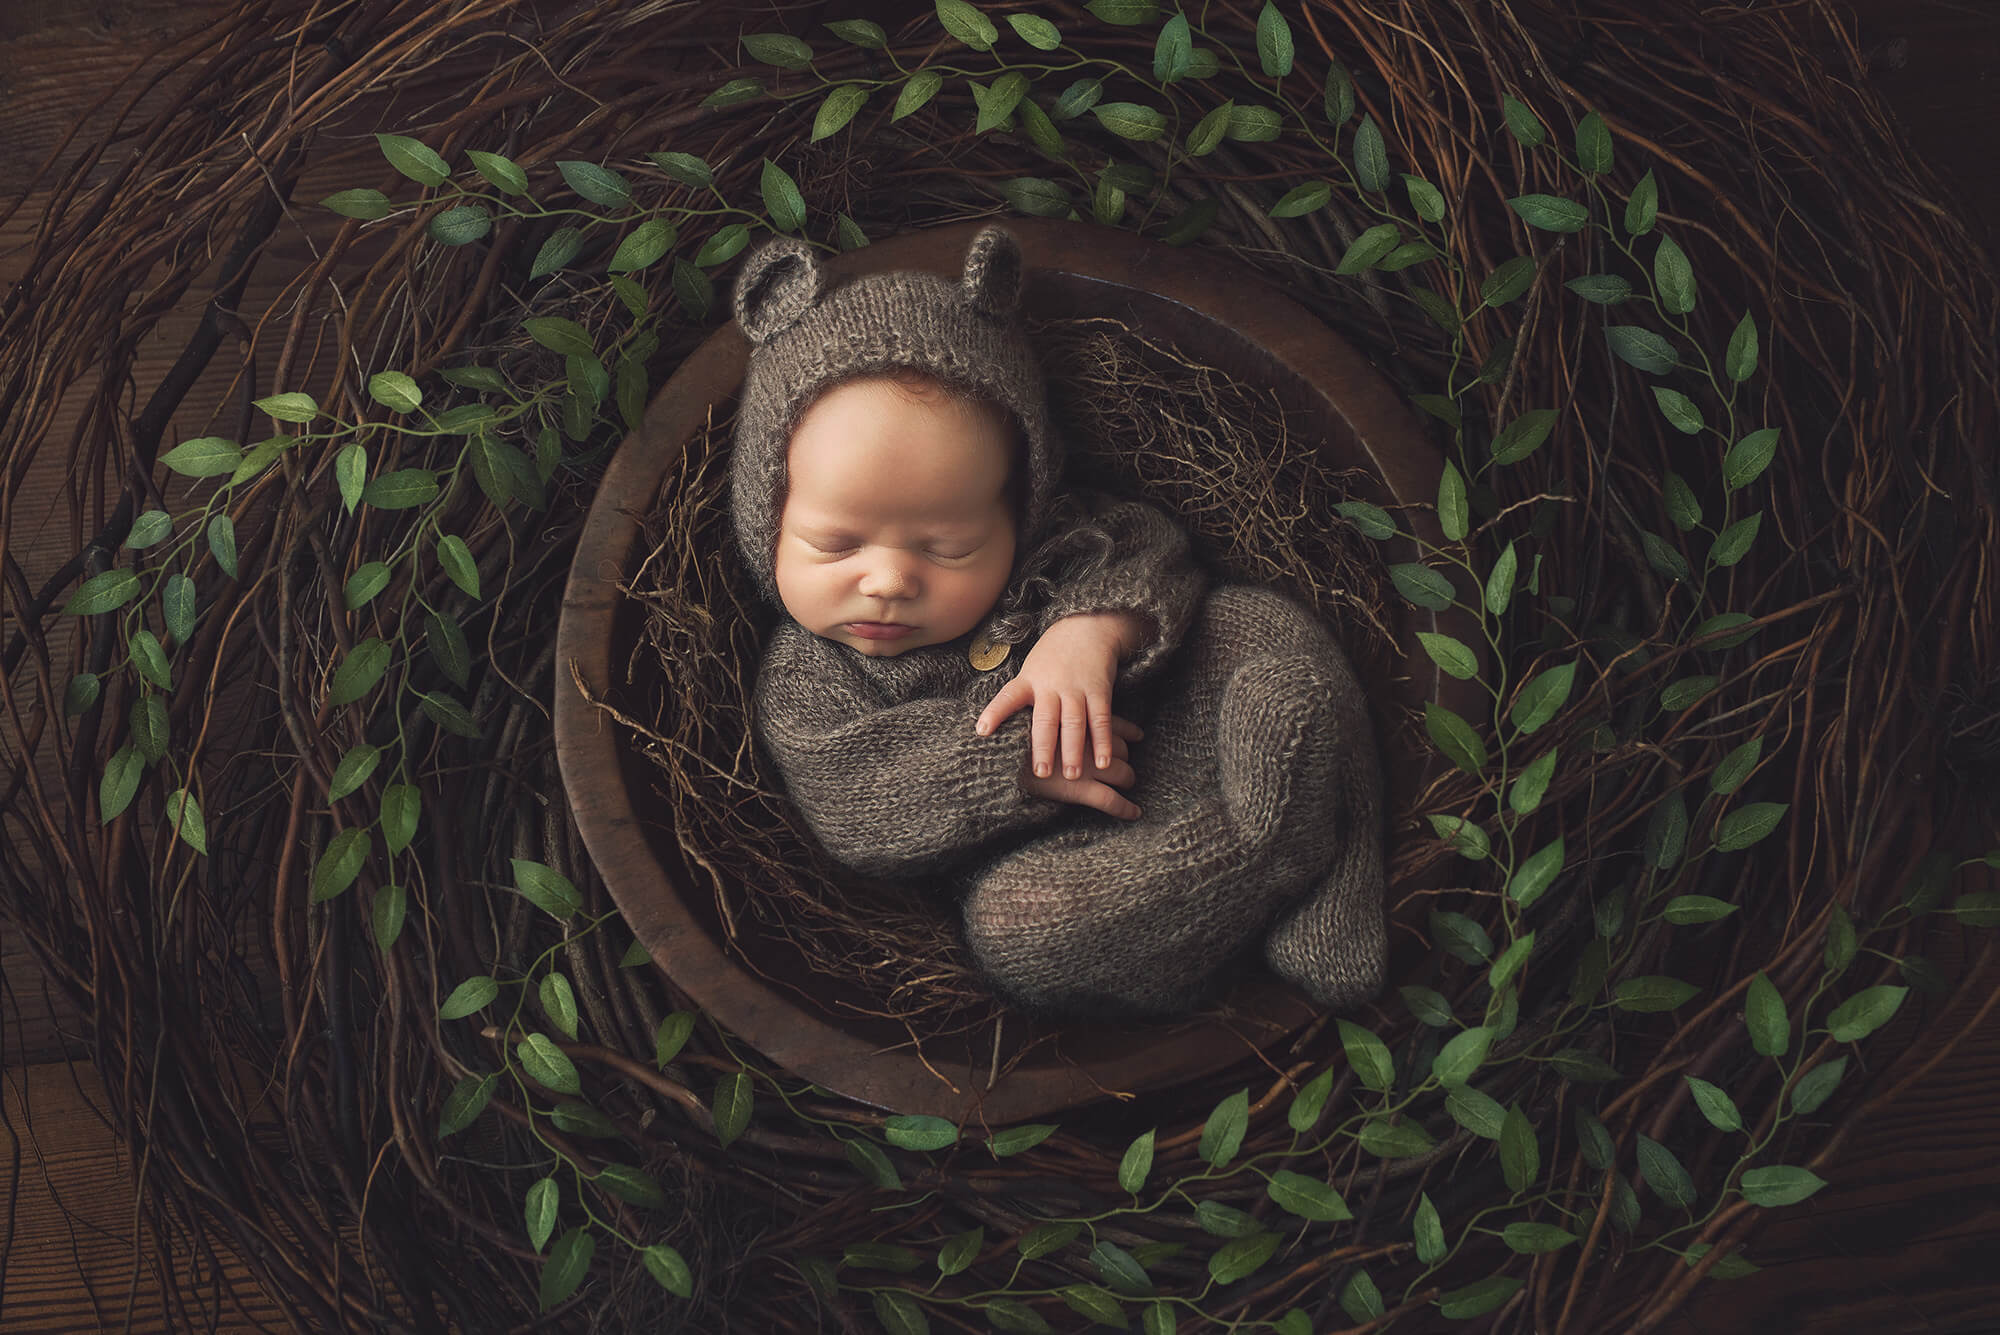 One last of Hudsen in a bear outfit in a bowl of branches